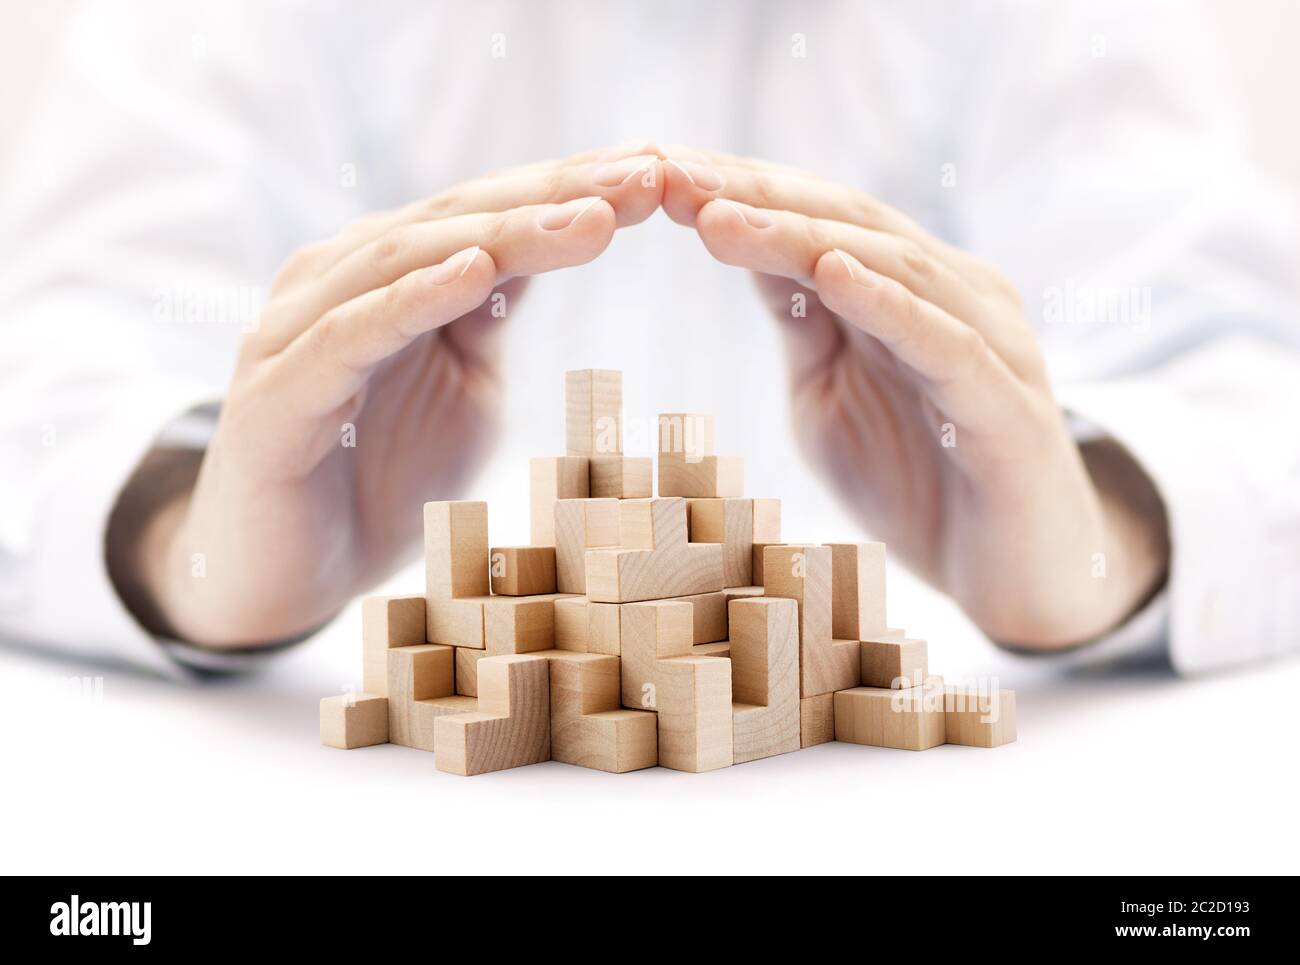 Safety business development concept. Wooden blocks covered by hands. Stock Photo